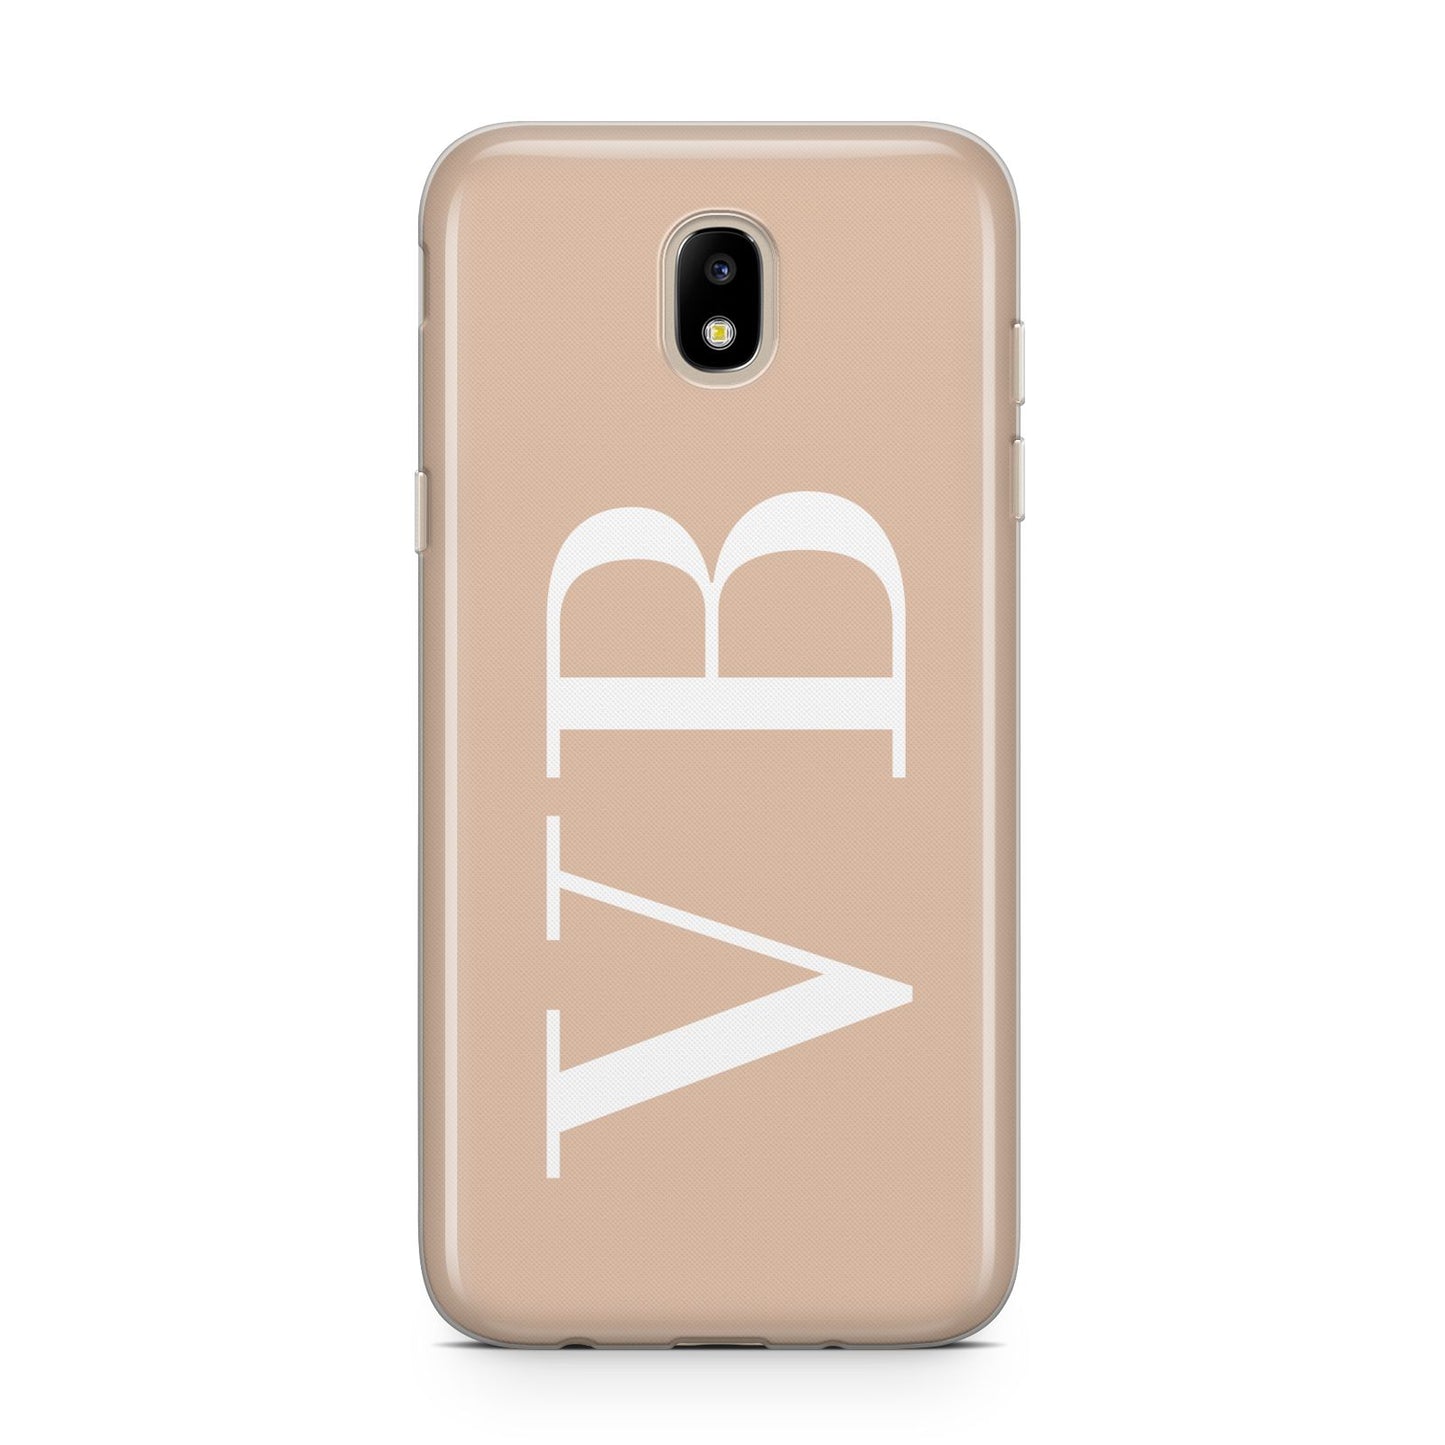 Nude And White Personalised Samsung J5 2017 Case